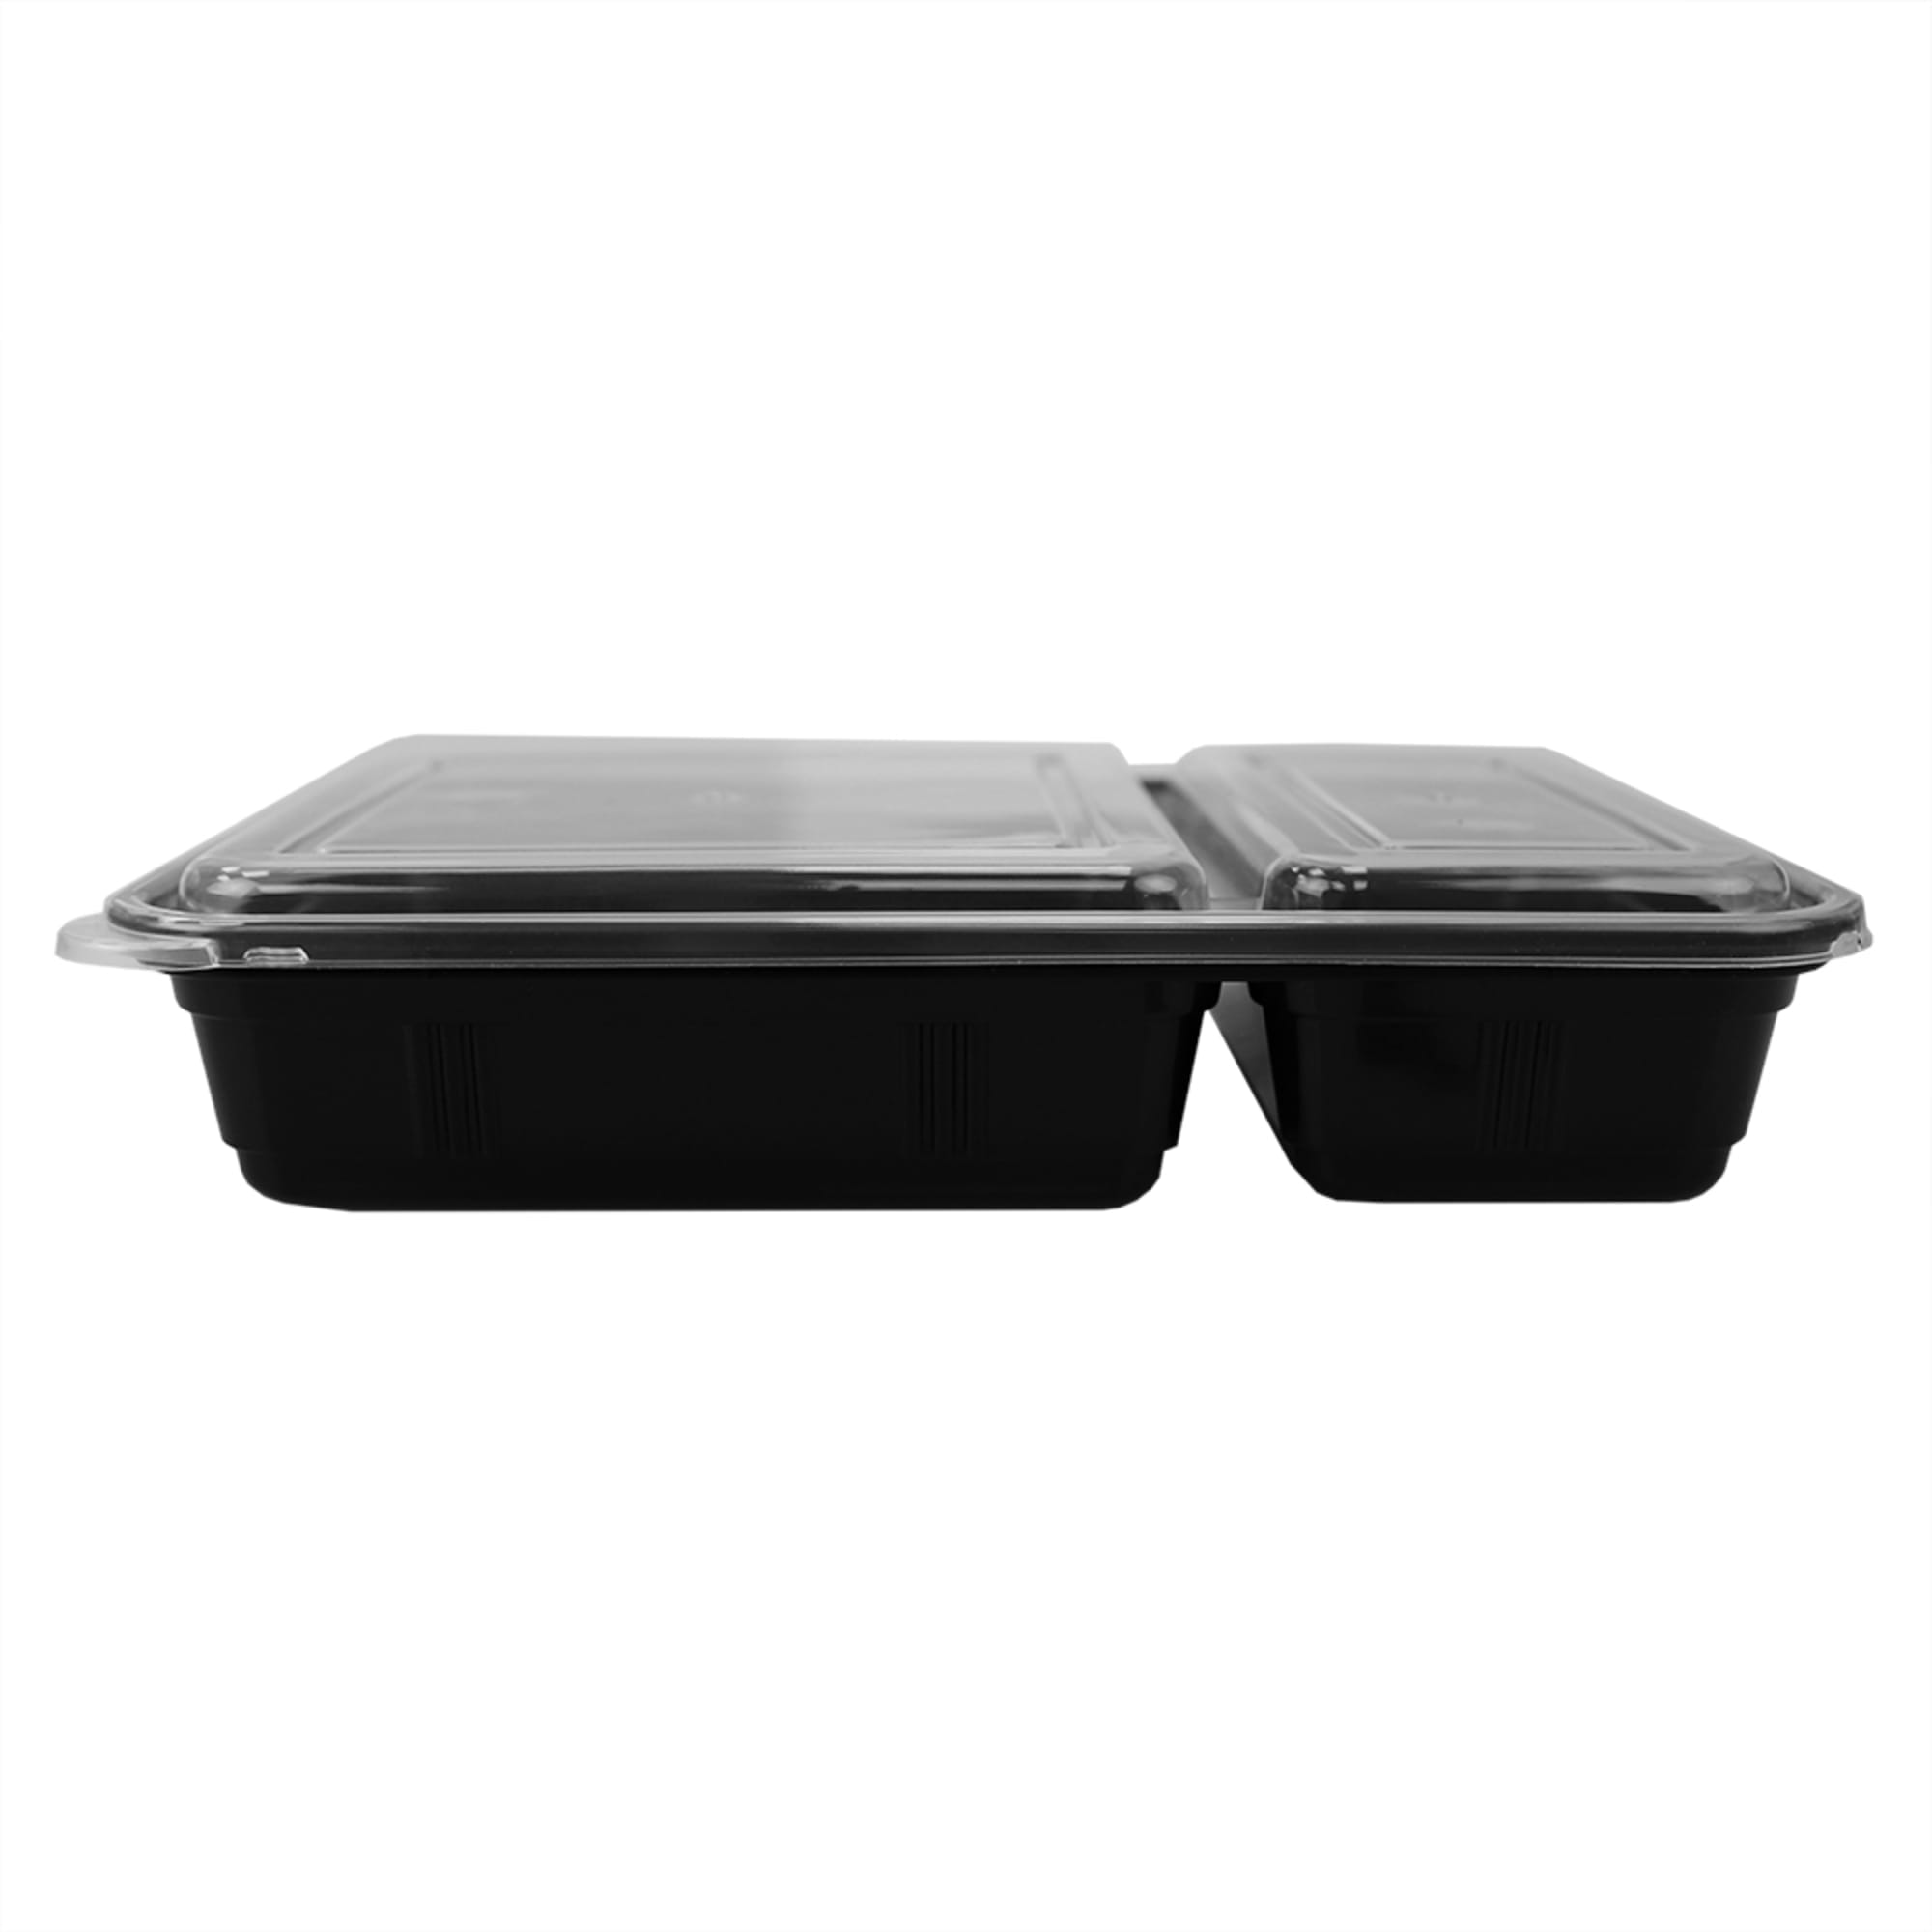 Home Basic 10 Piece 2 Compartment BPA-Free Plastic Meal Prep Containers, Black $3.00 EACH, CASE PACK OF 12